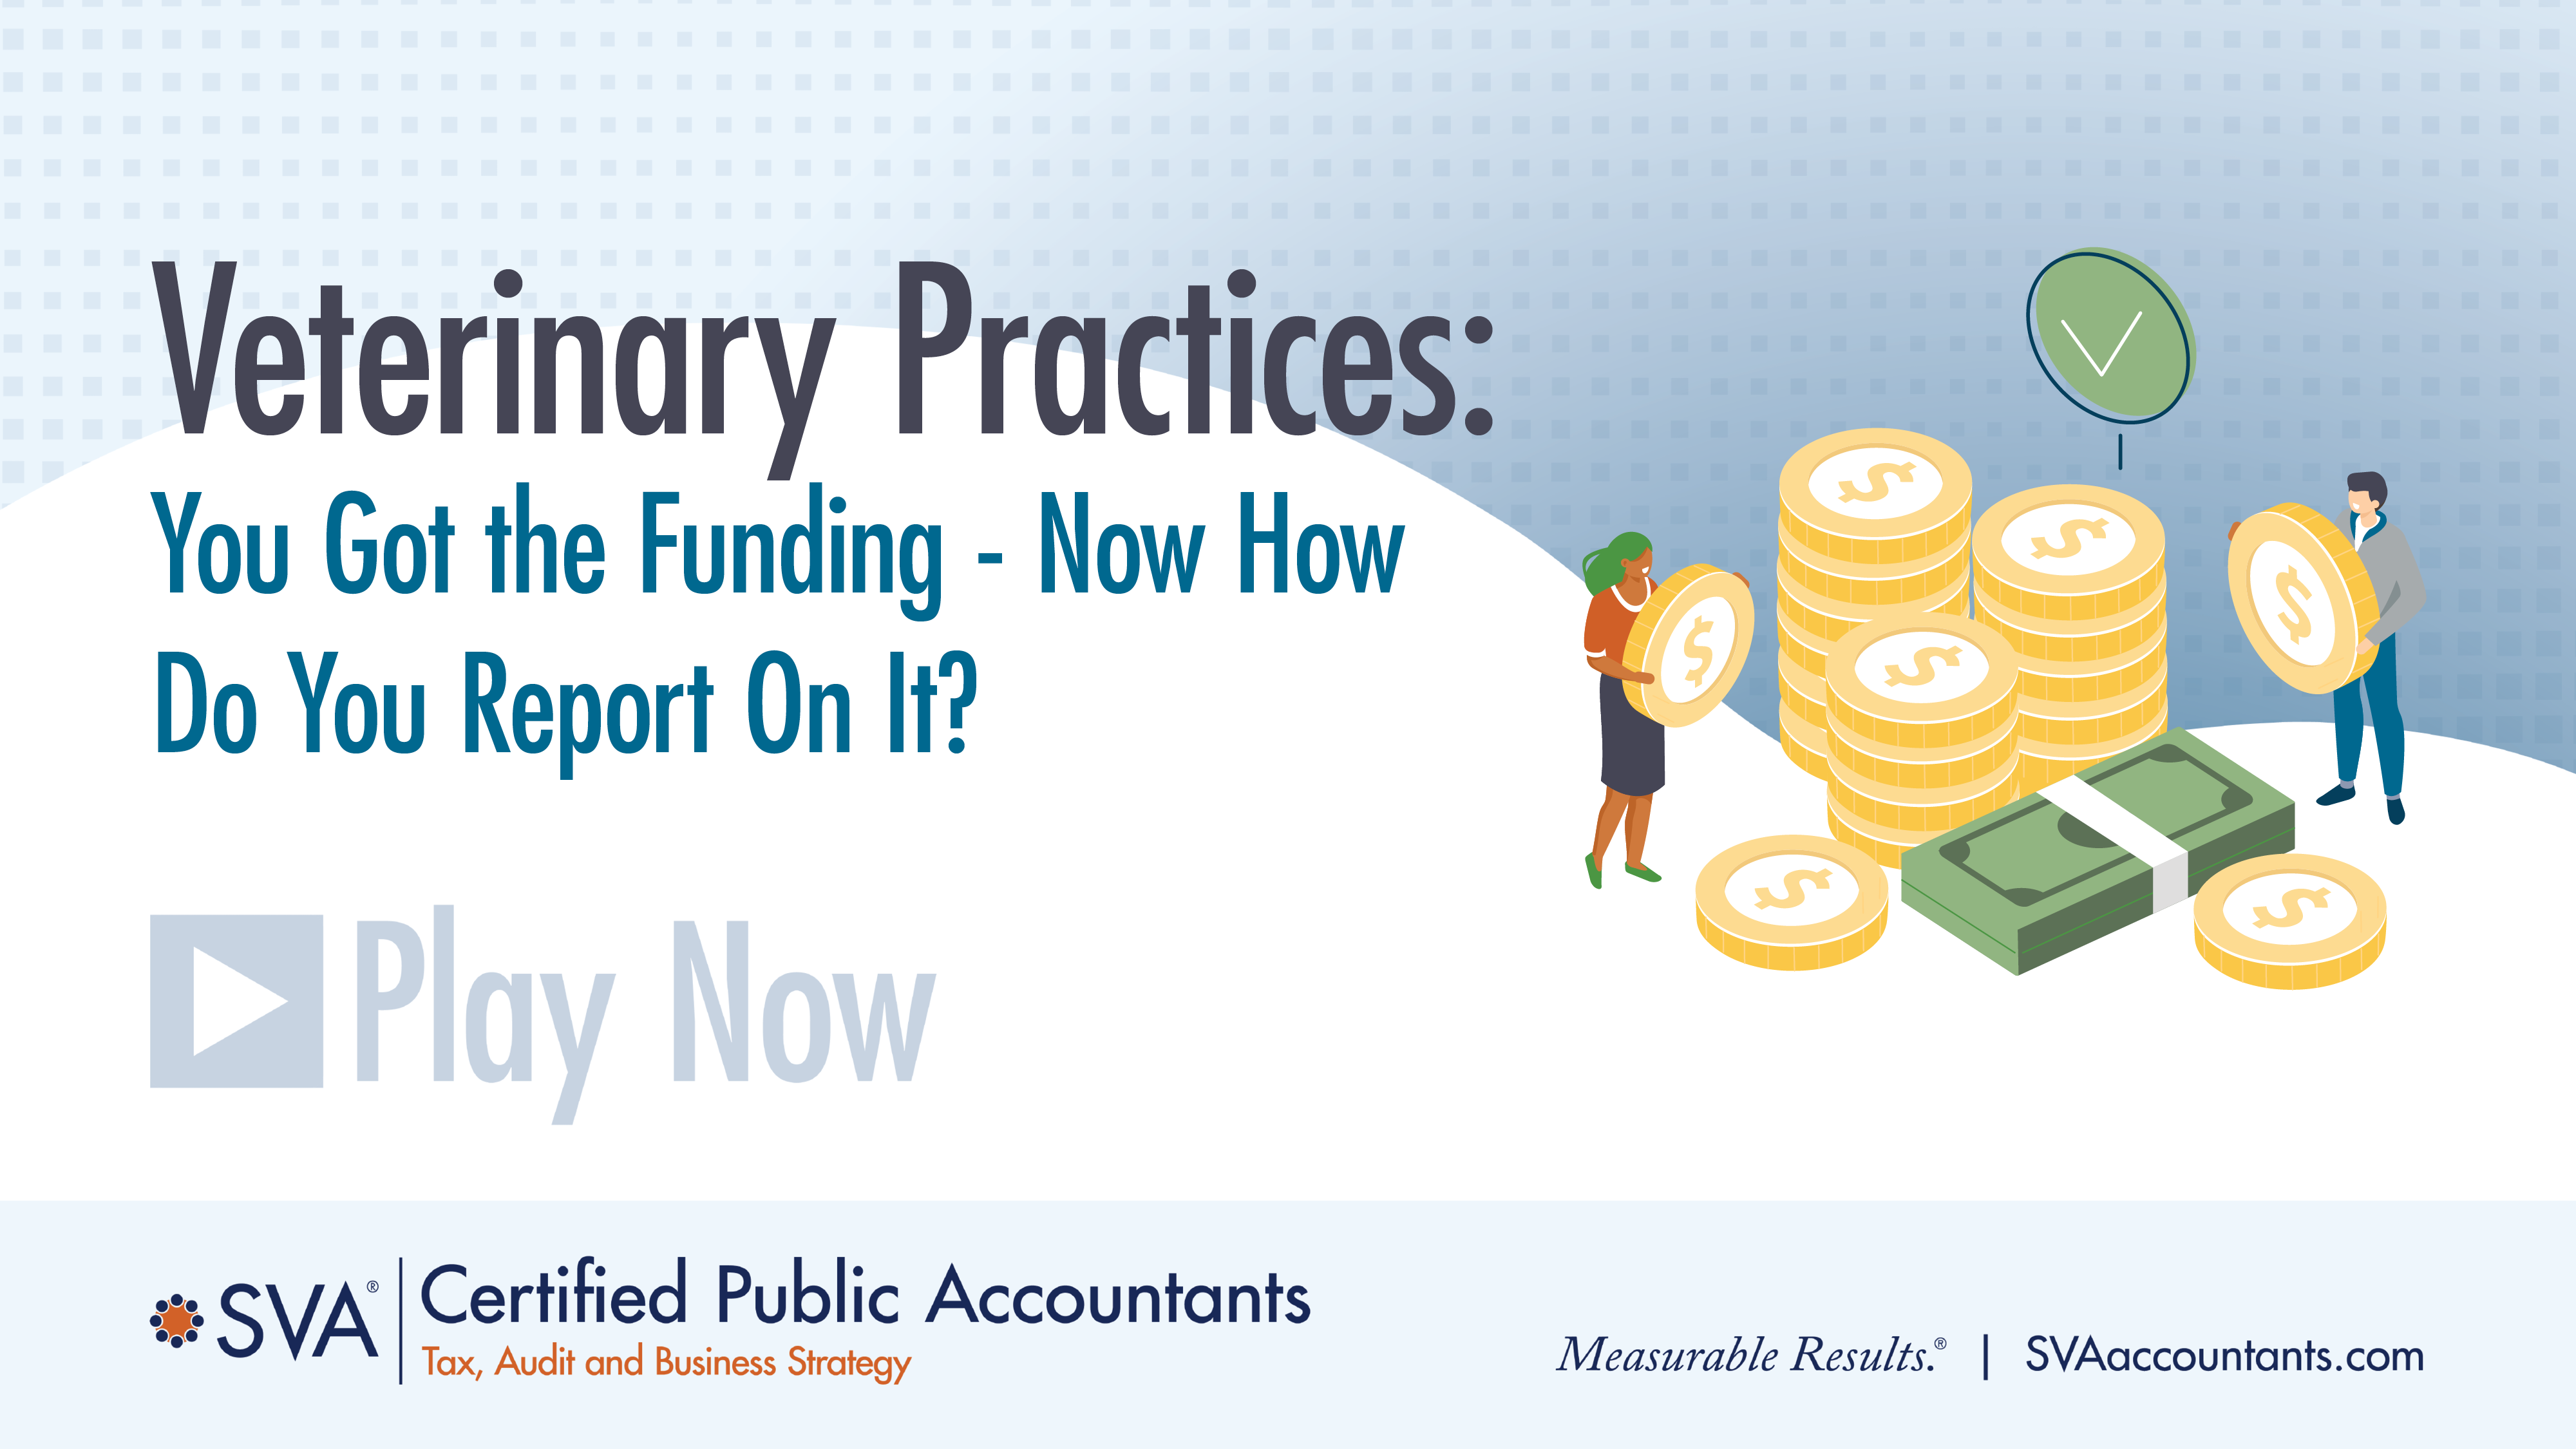 Veterinary Practices: You Got the Funding - Now How Do You Report On It?